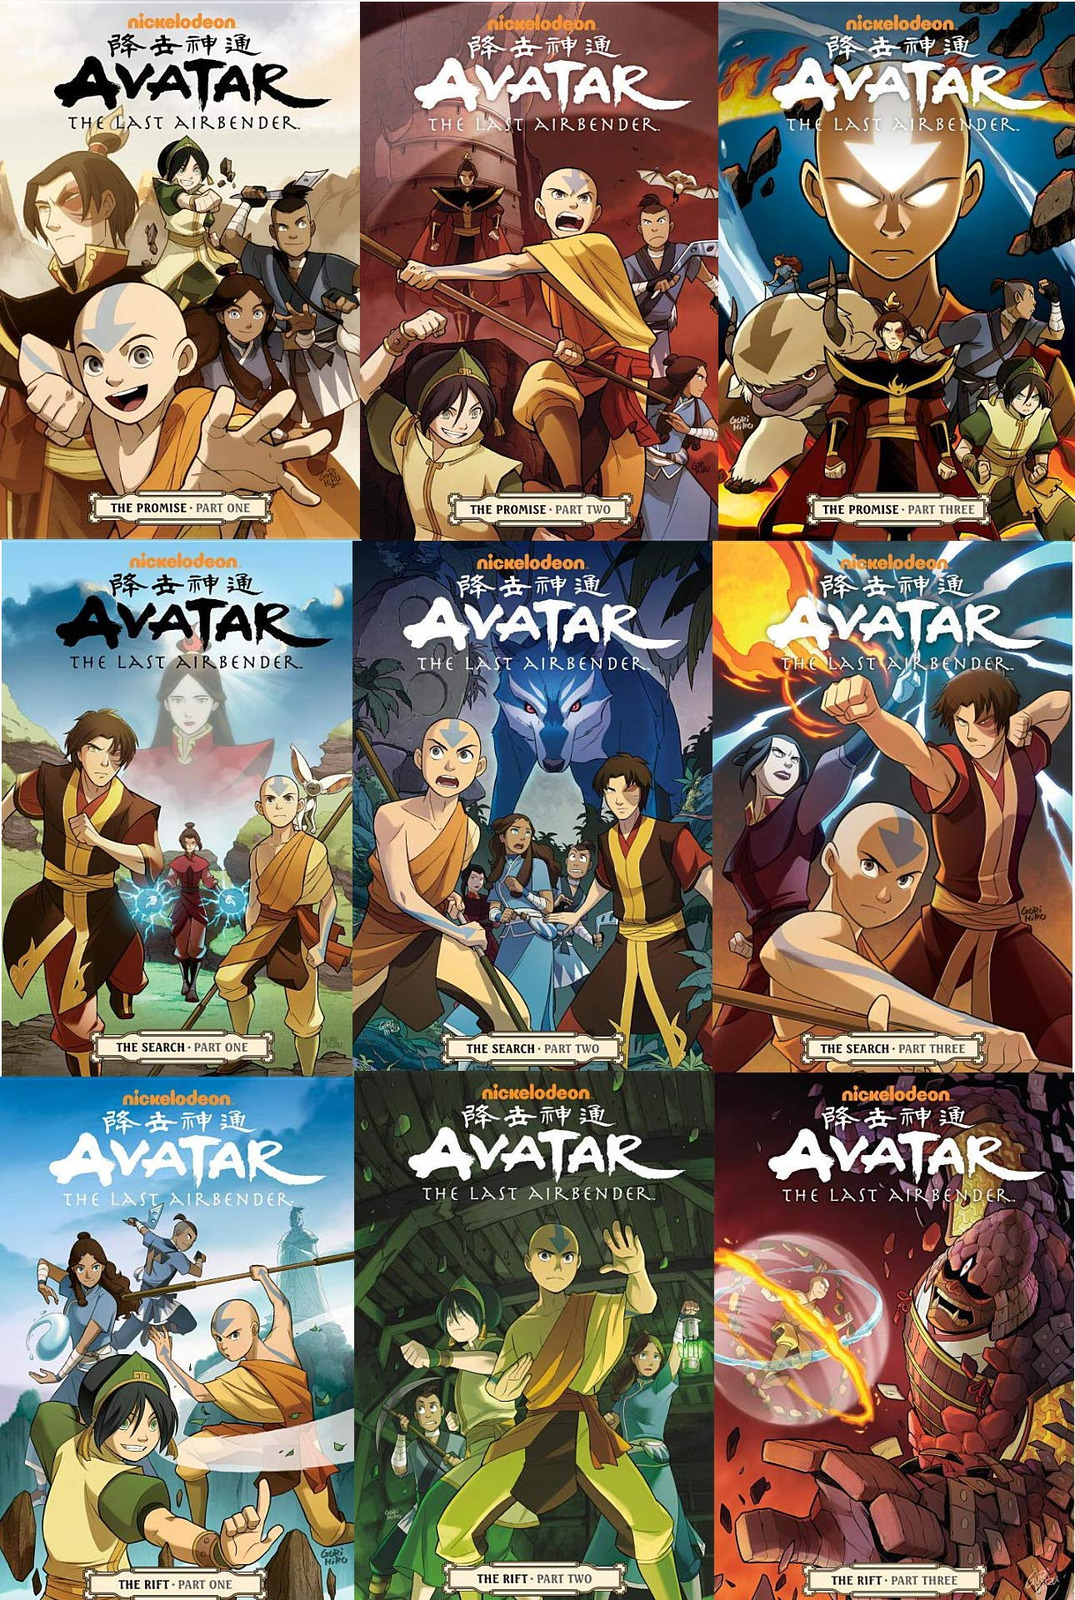 Avatar, the Last Airbender Series 9 Book Sets (The Promise Part 1,2,3;The Search